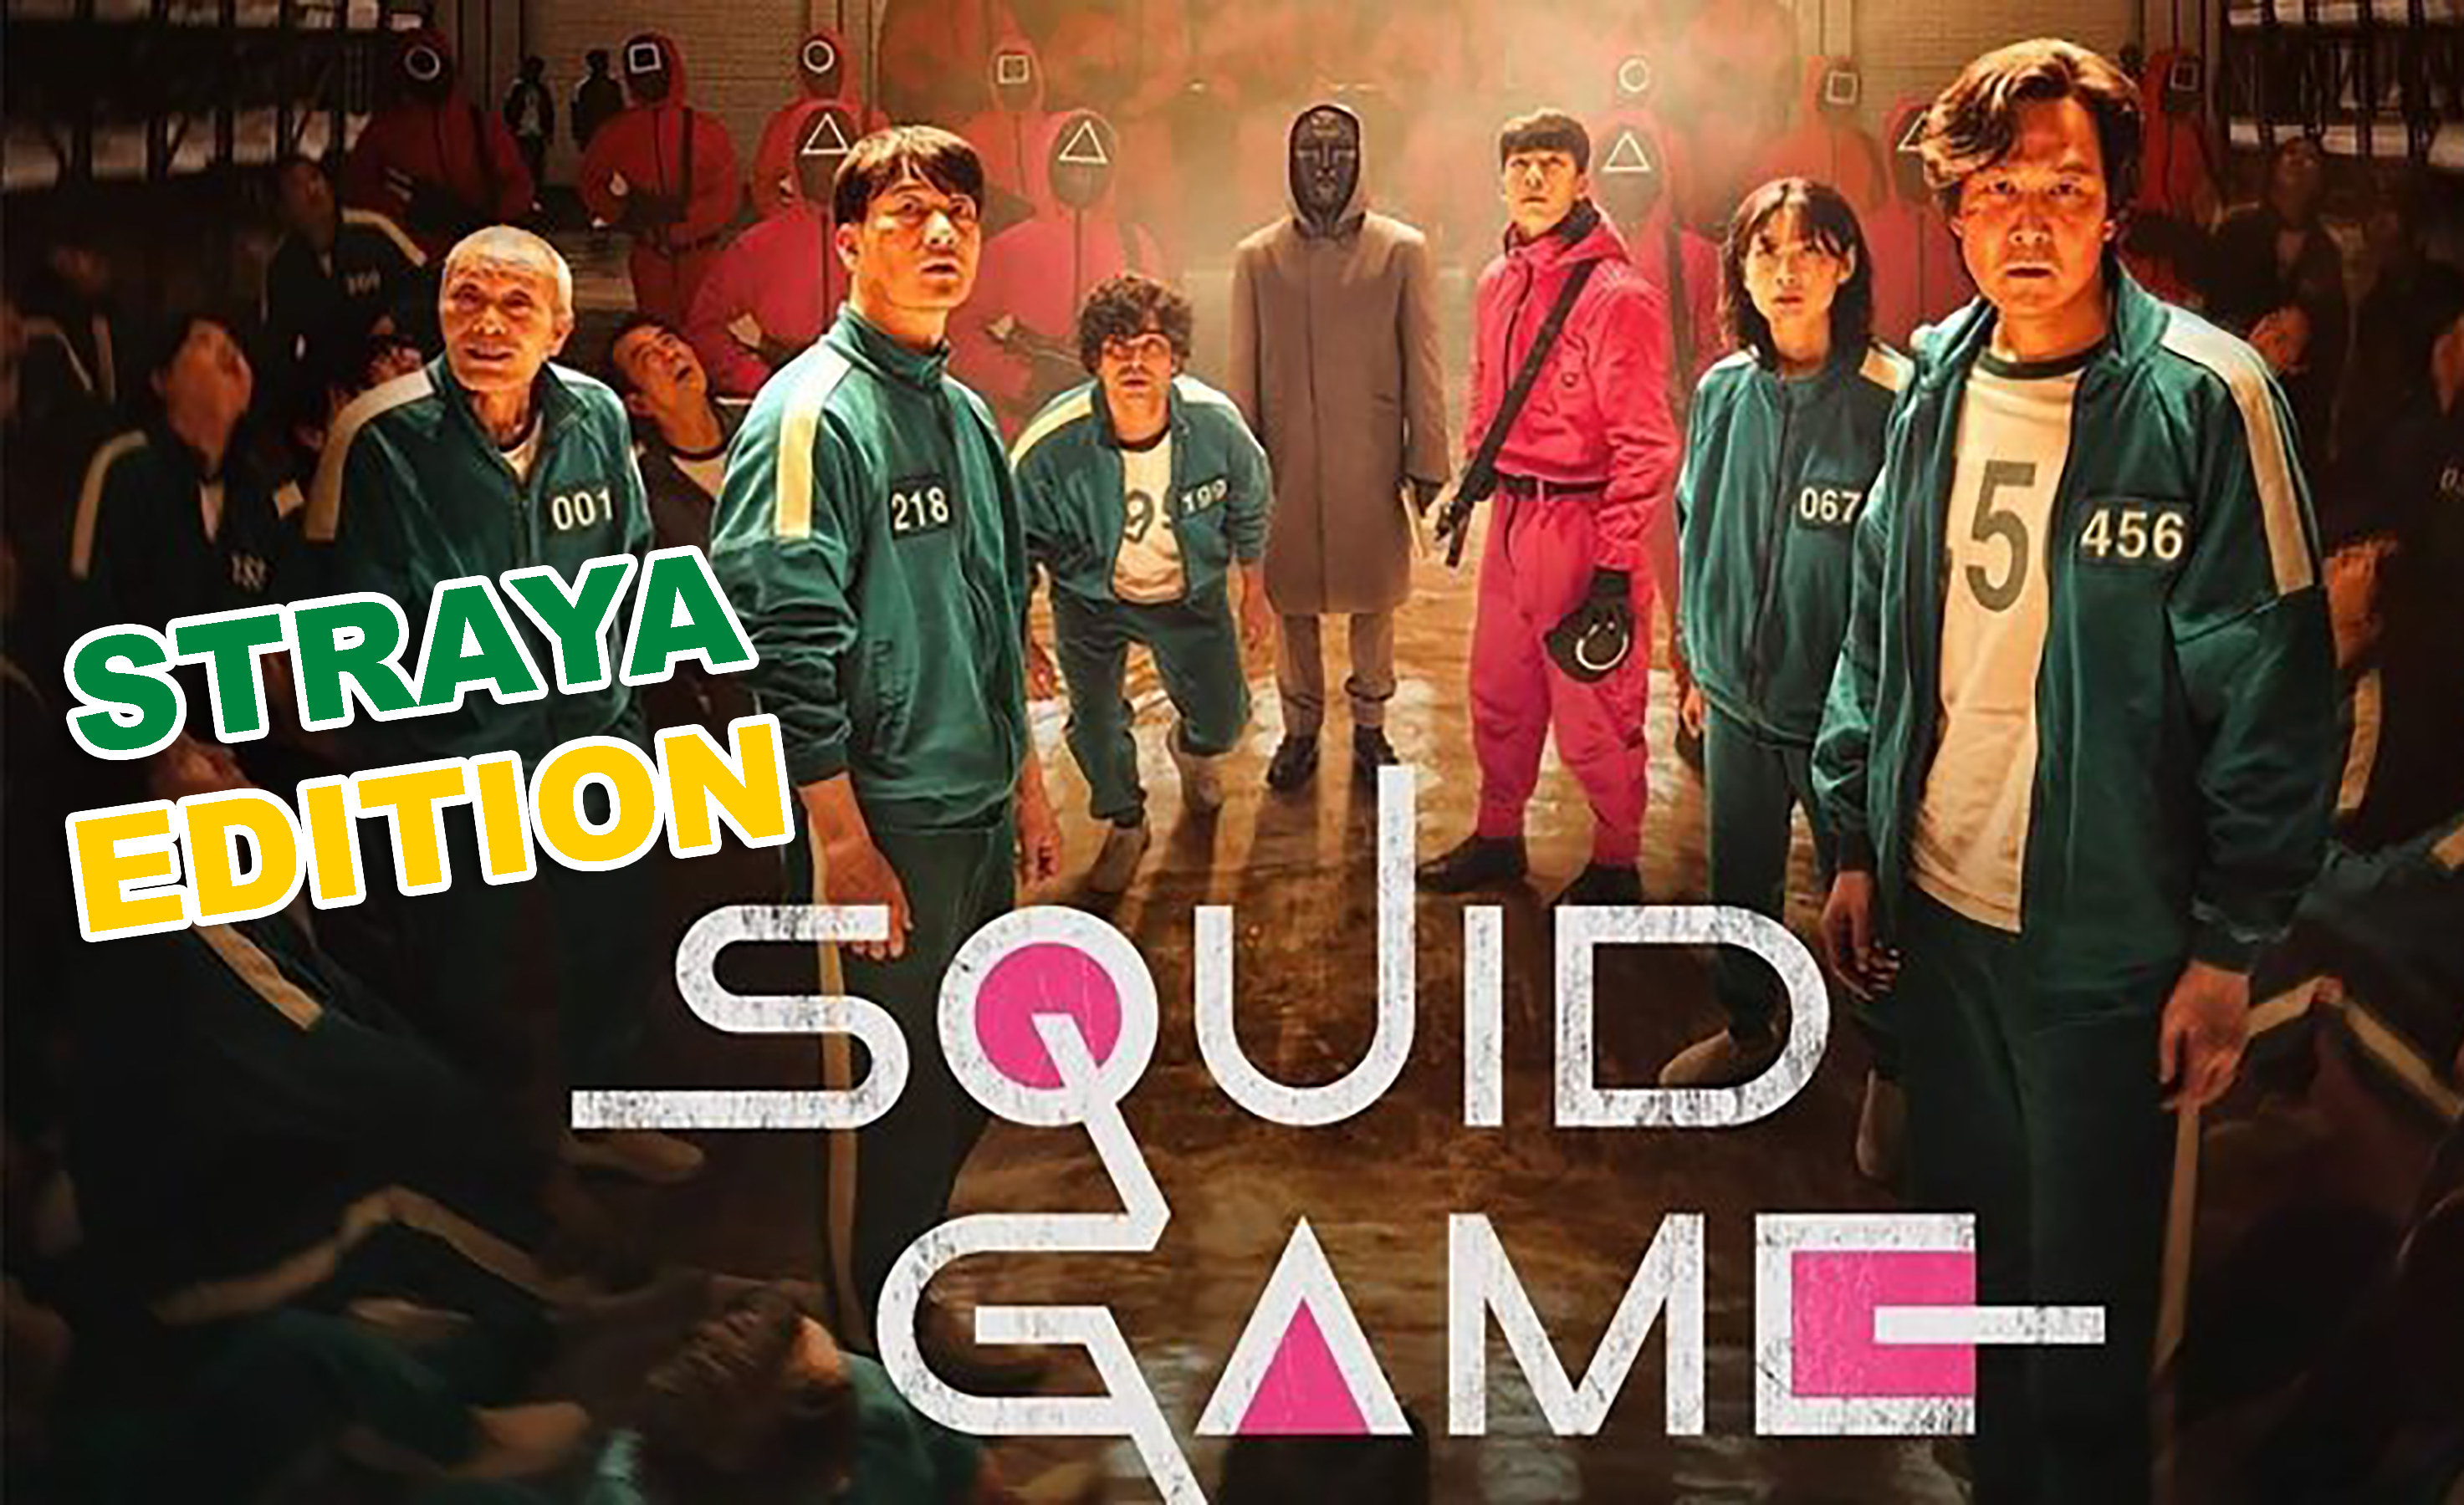 The poster for Squid Game; there&#x27;s text added saying &quot;Straya edition&quot;